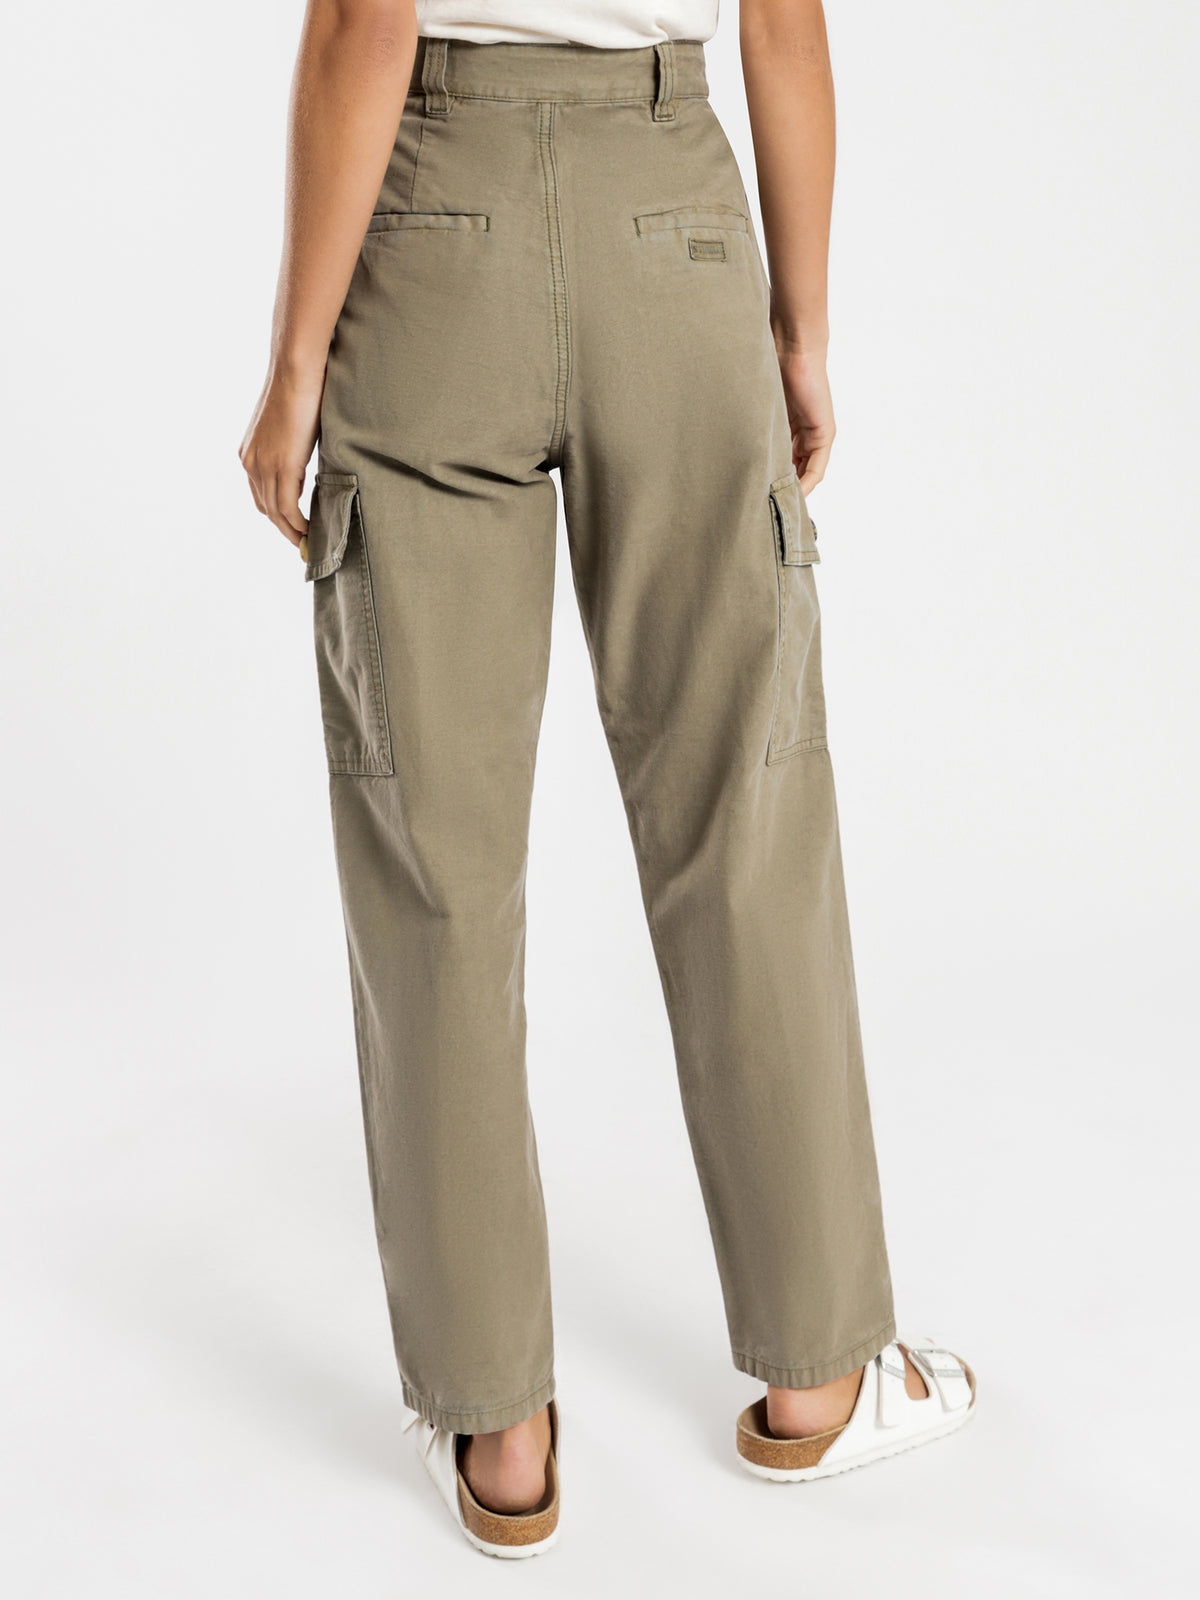 Cargo Pants in Army Green - Glue Store